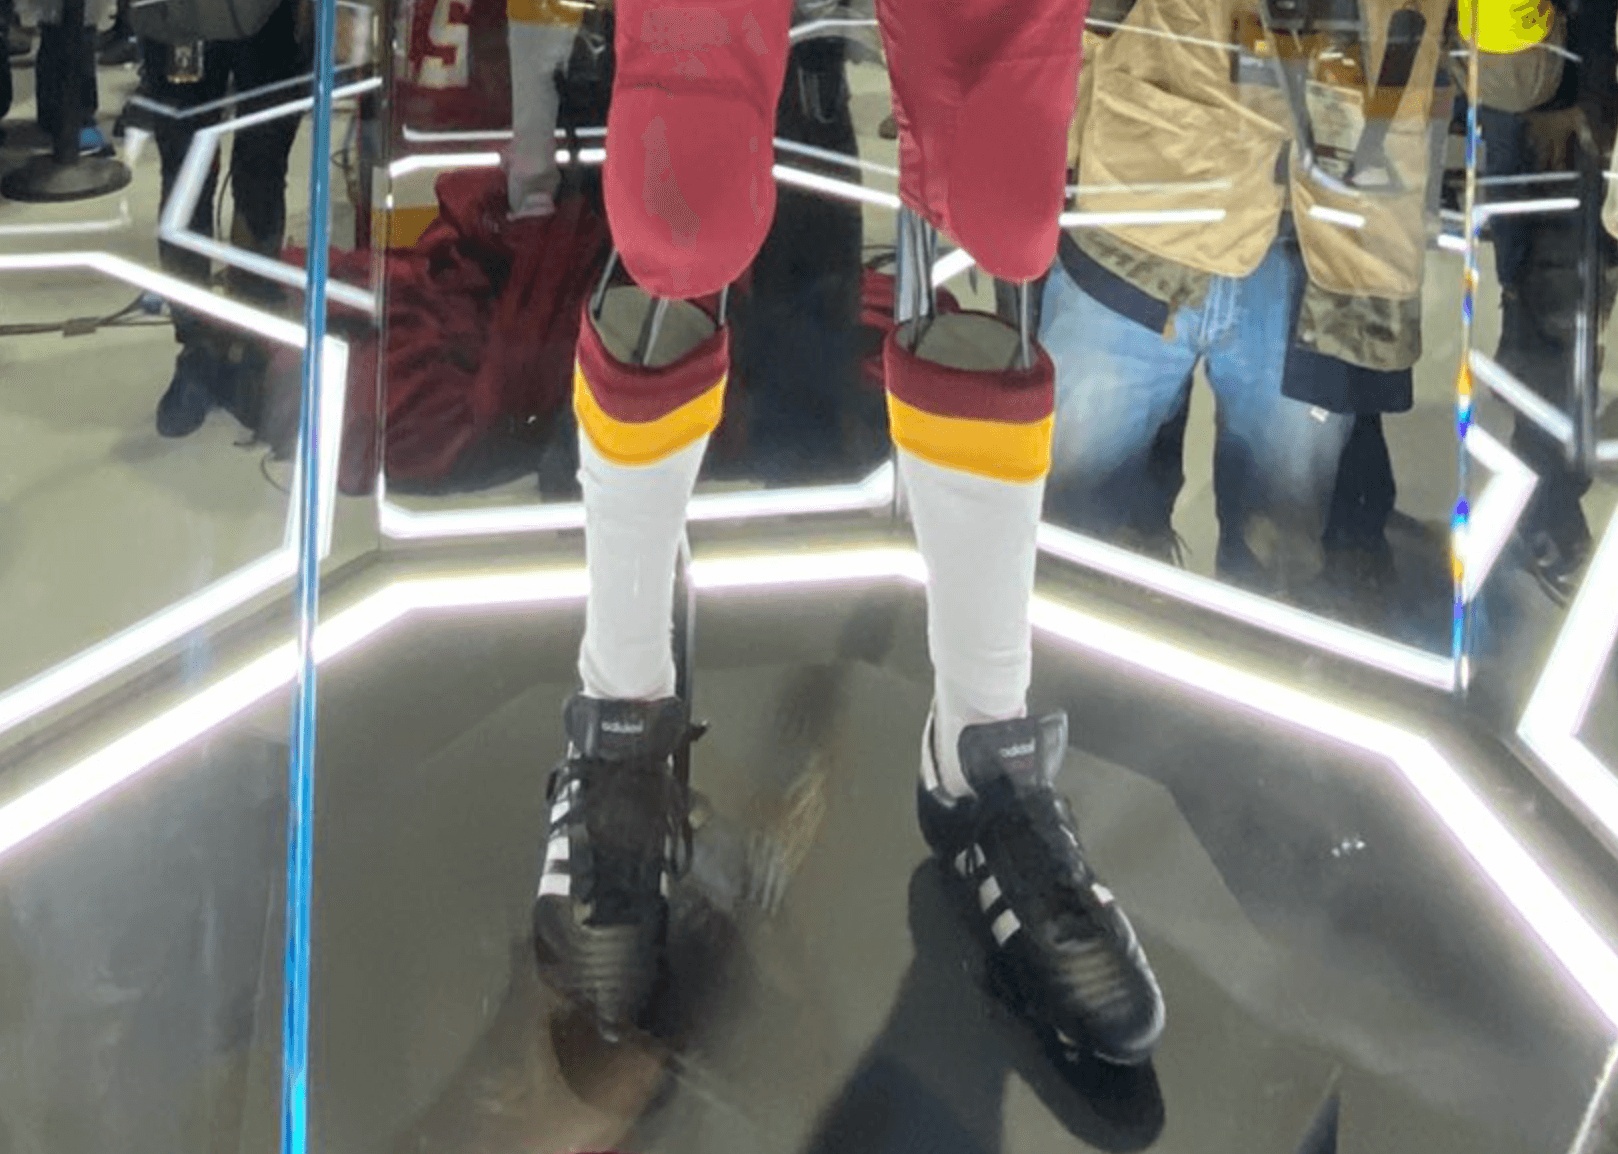 The Commanders' latest tribute to Sean Taylor is insultingly bad